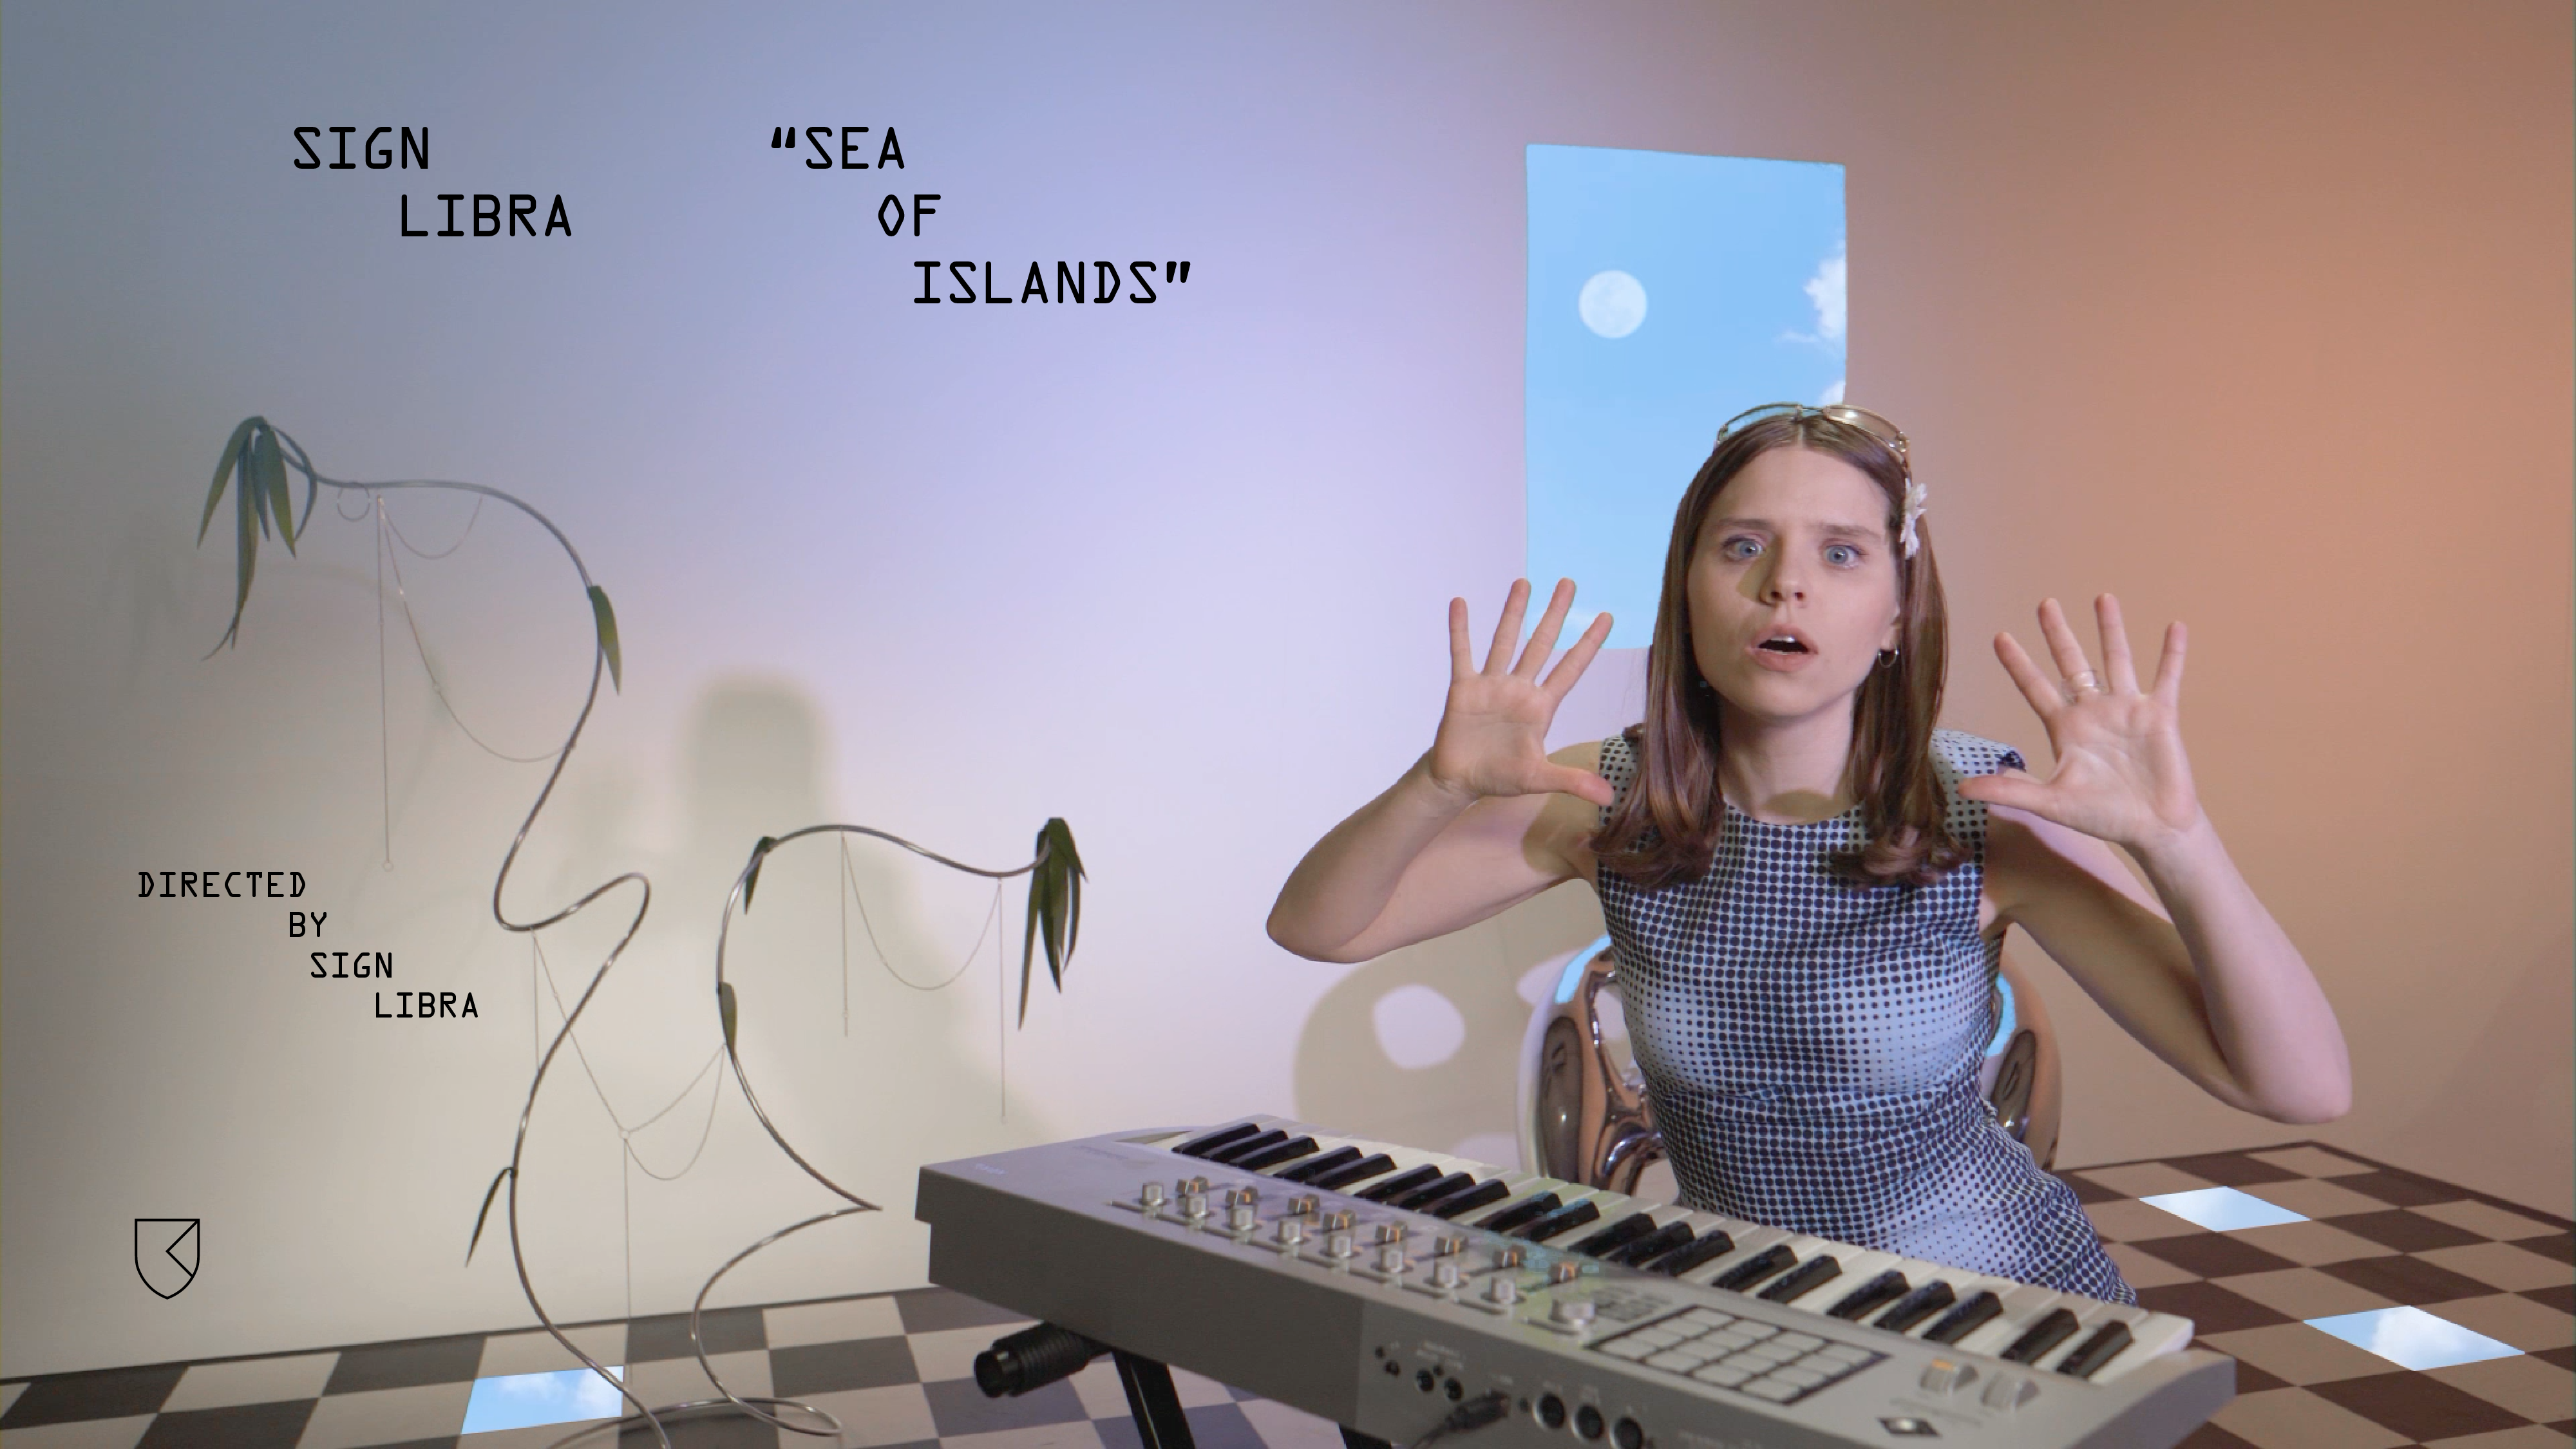 Link to Video for Sign Libra – Sea of Islands